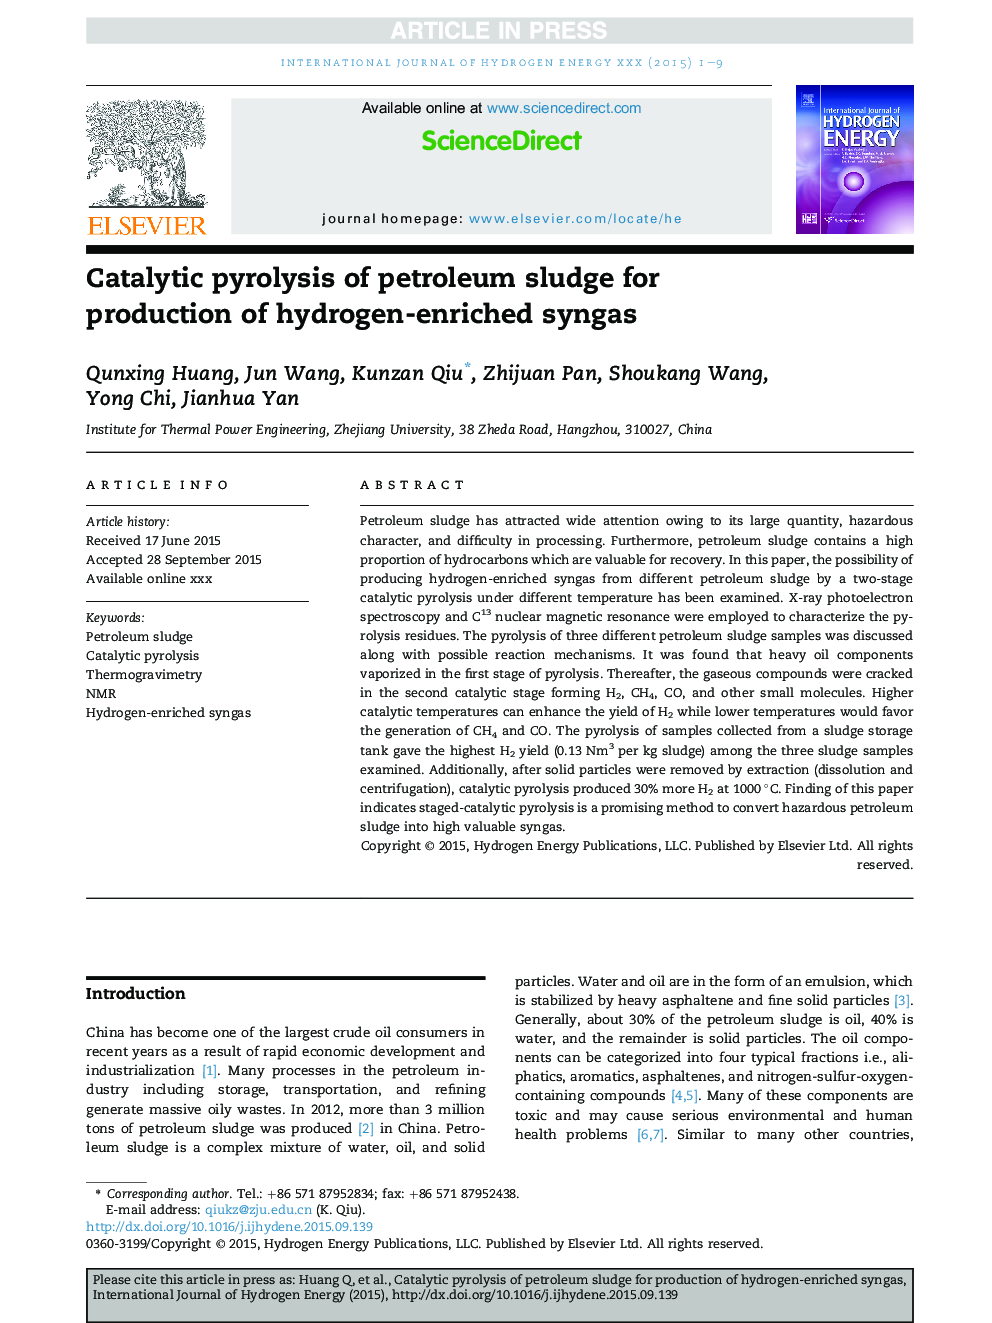 Catalytic pyrolysis of petroleum sludge for production of hydrogen-enriched syngas